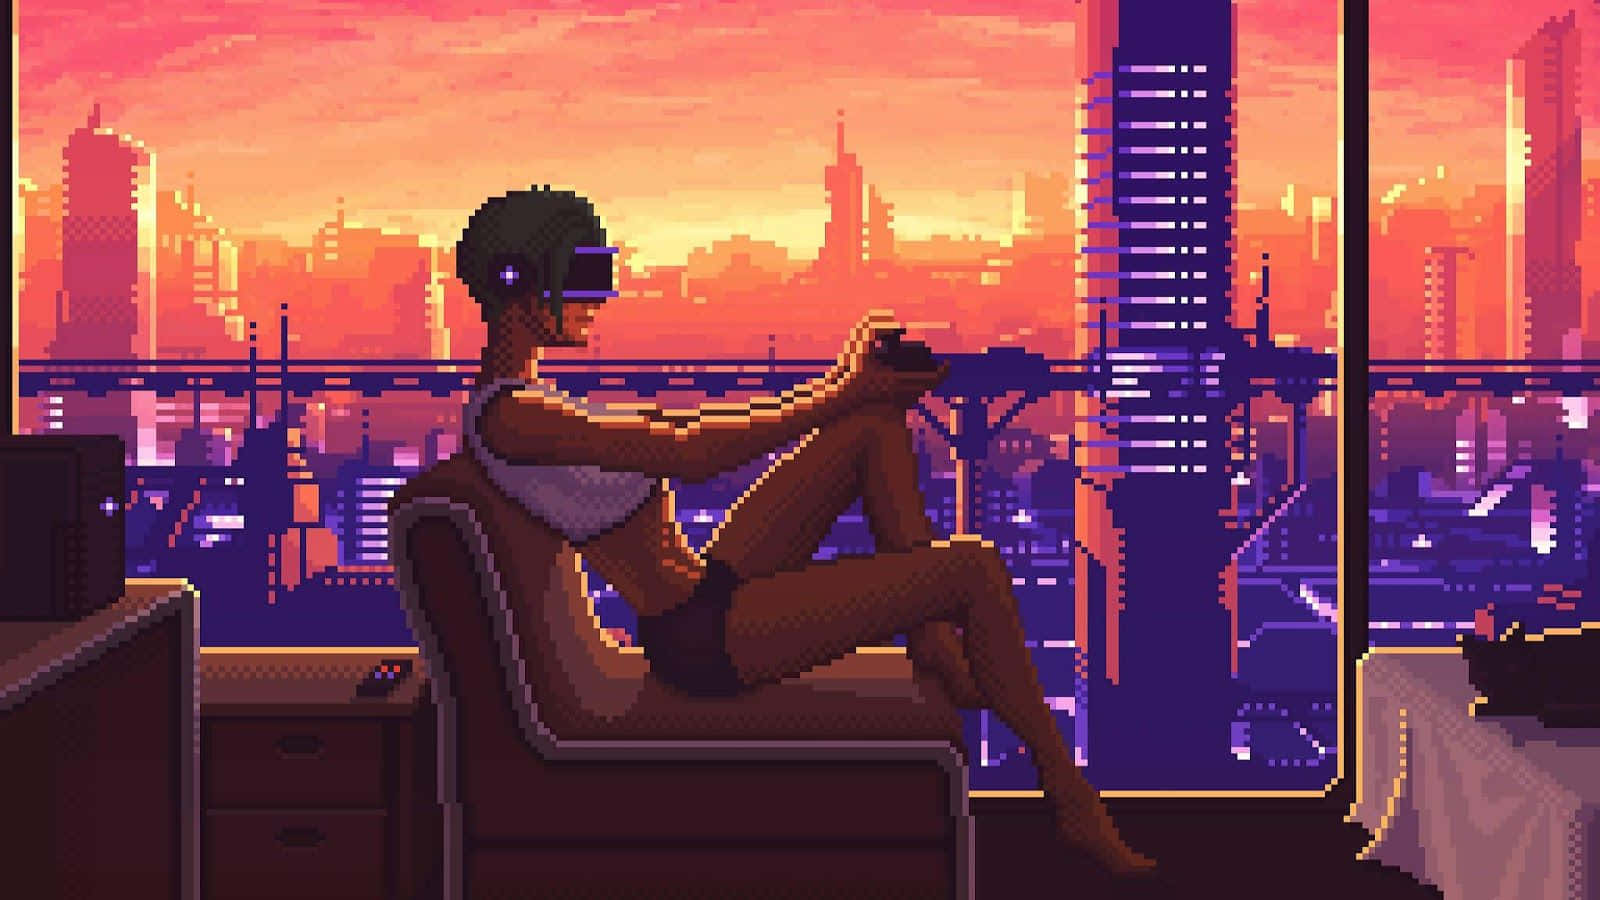 Cyberpunk-Inspired Pixel Art with a Dash of Color Wallpaper